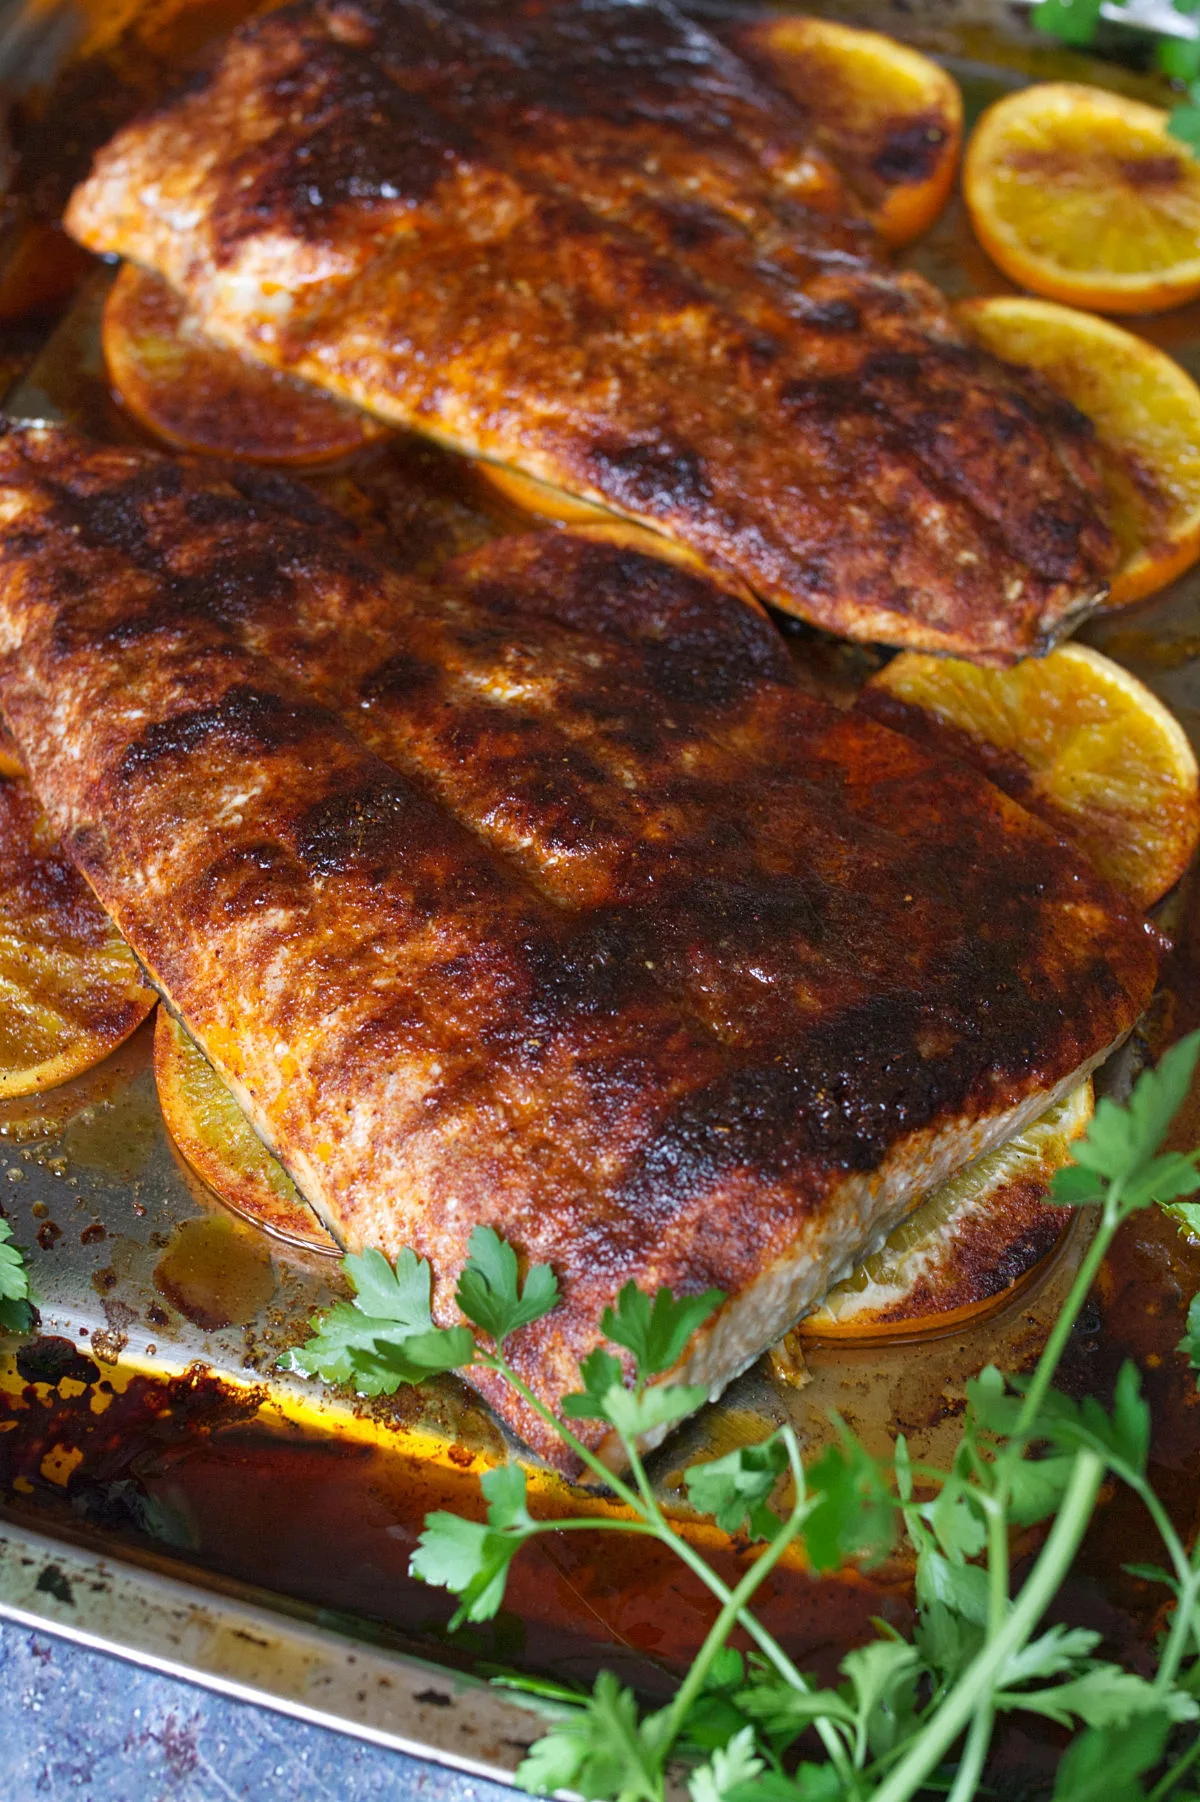 Large fillets of Spanish-style spicy salmon beside some orange rounds and fresh herbs.